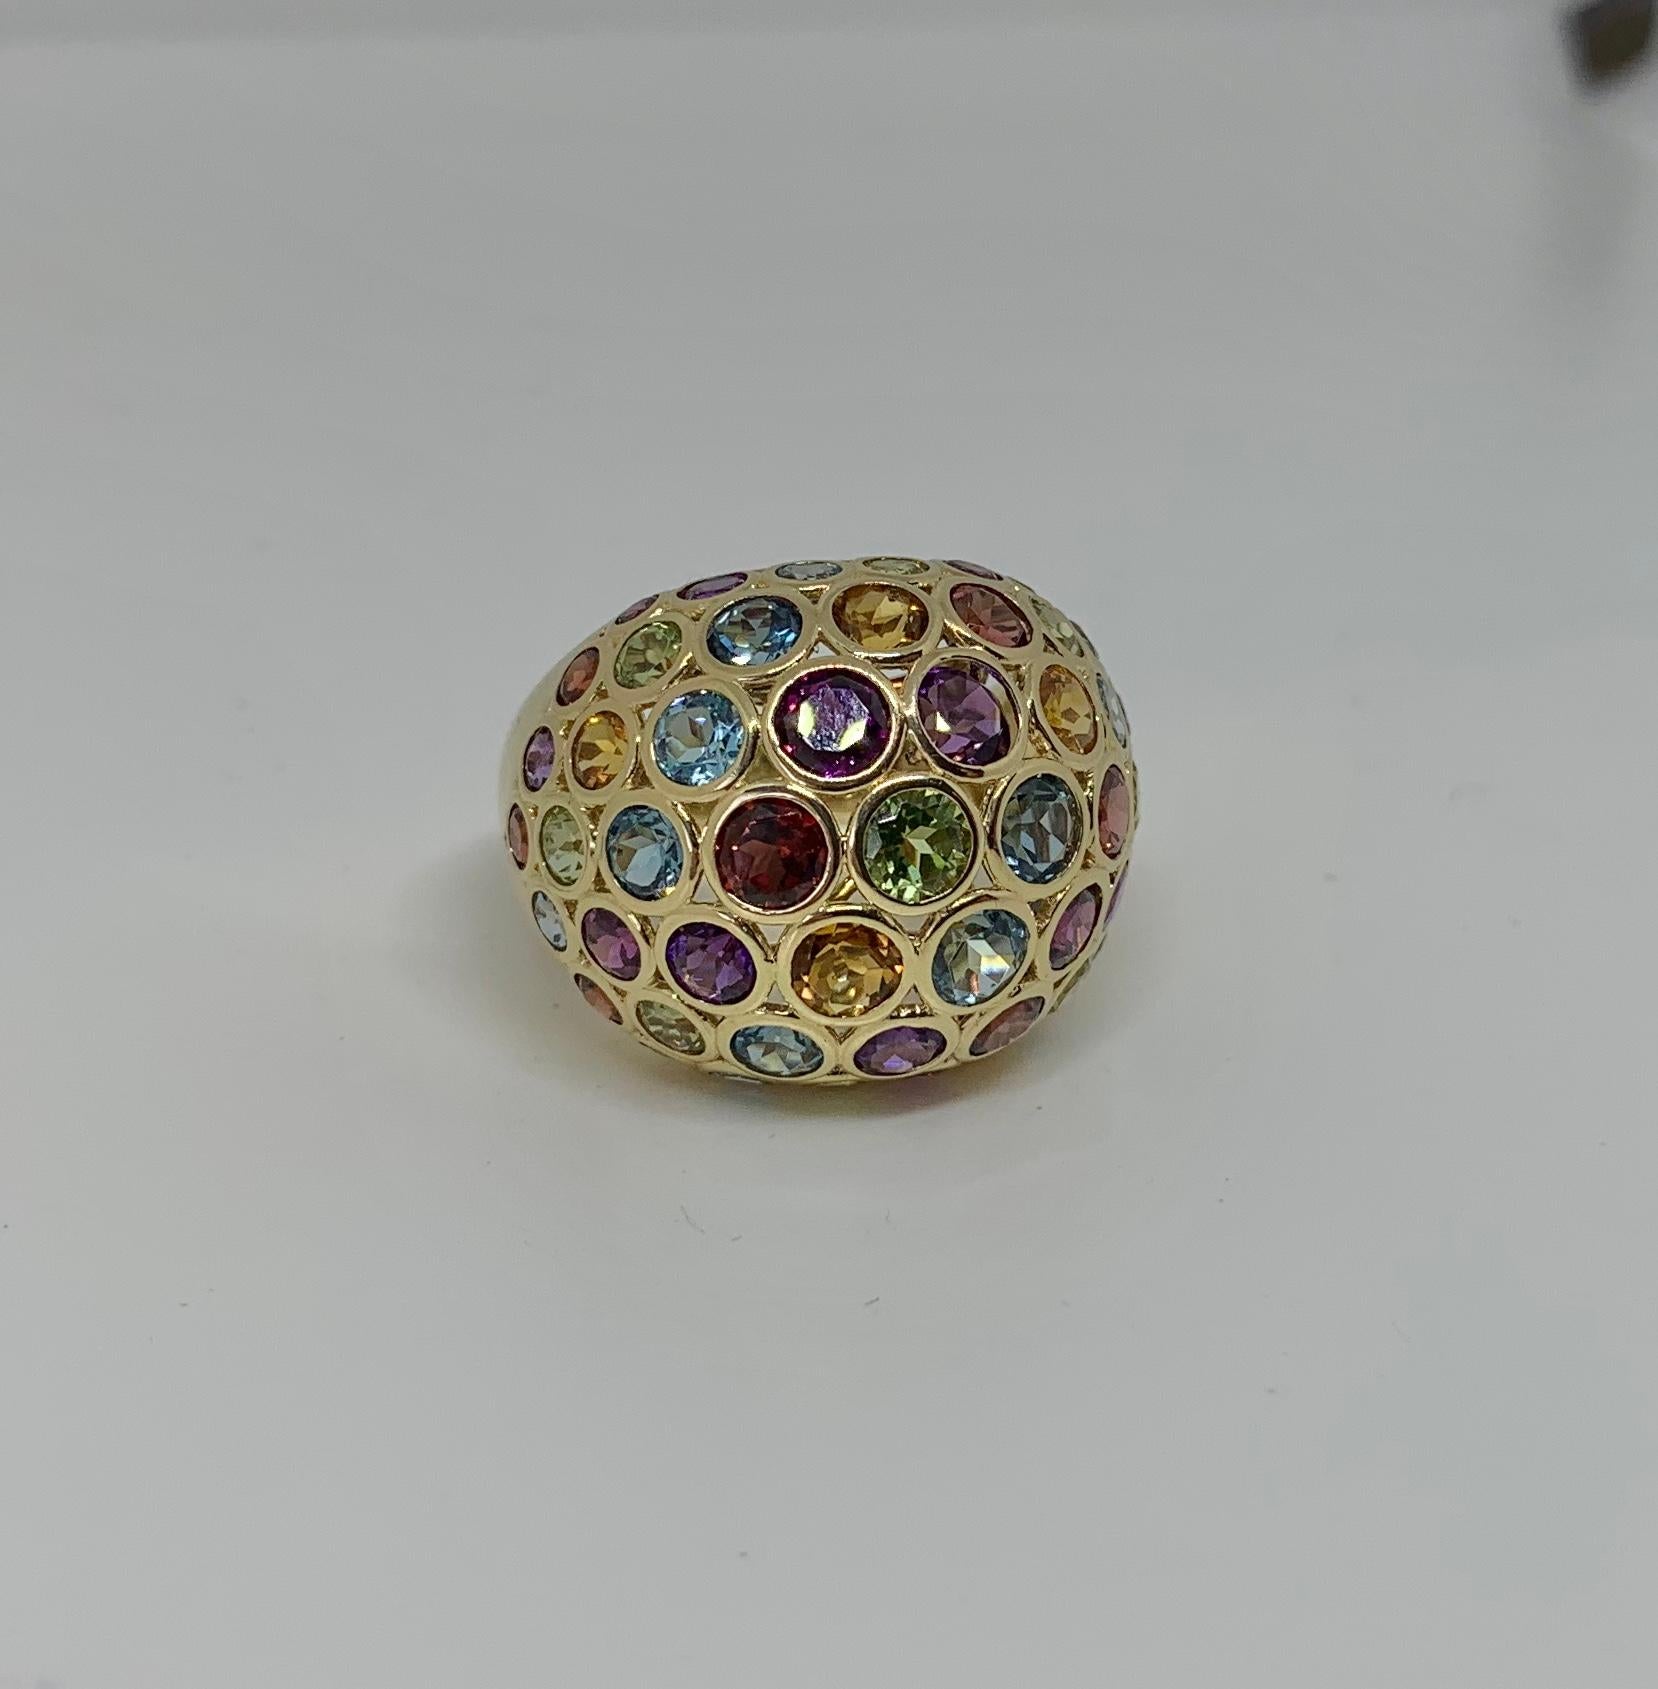 This is a gorgeous Retro Mid-Century Modern Cocktail Ring with Peridot, Aquamarine, Amethyst, Citrine, Garnet and Topaz gems by EFFY.  The fabulous round faceted jewels create a vibrant rainbow of color and are wonderfully cut to show off their